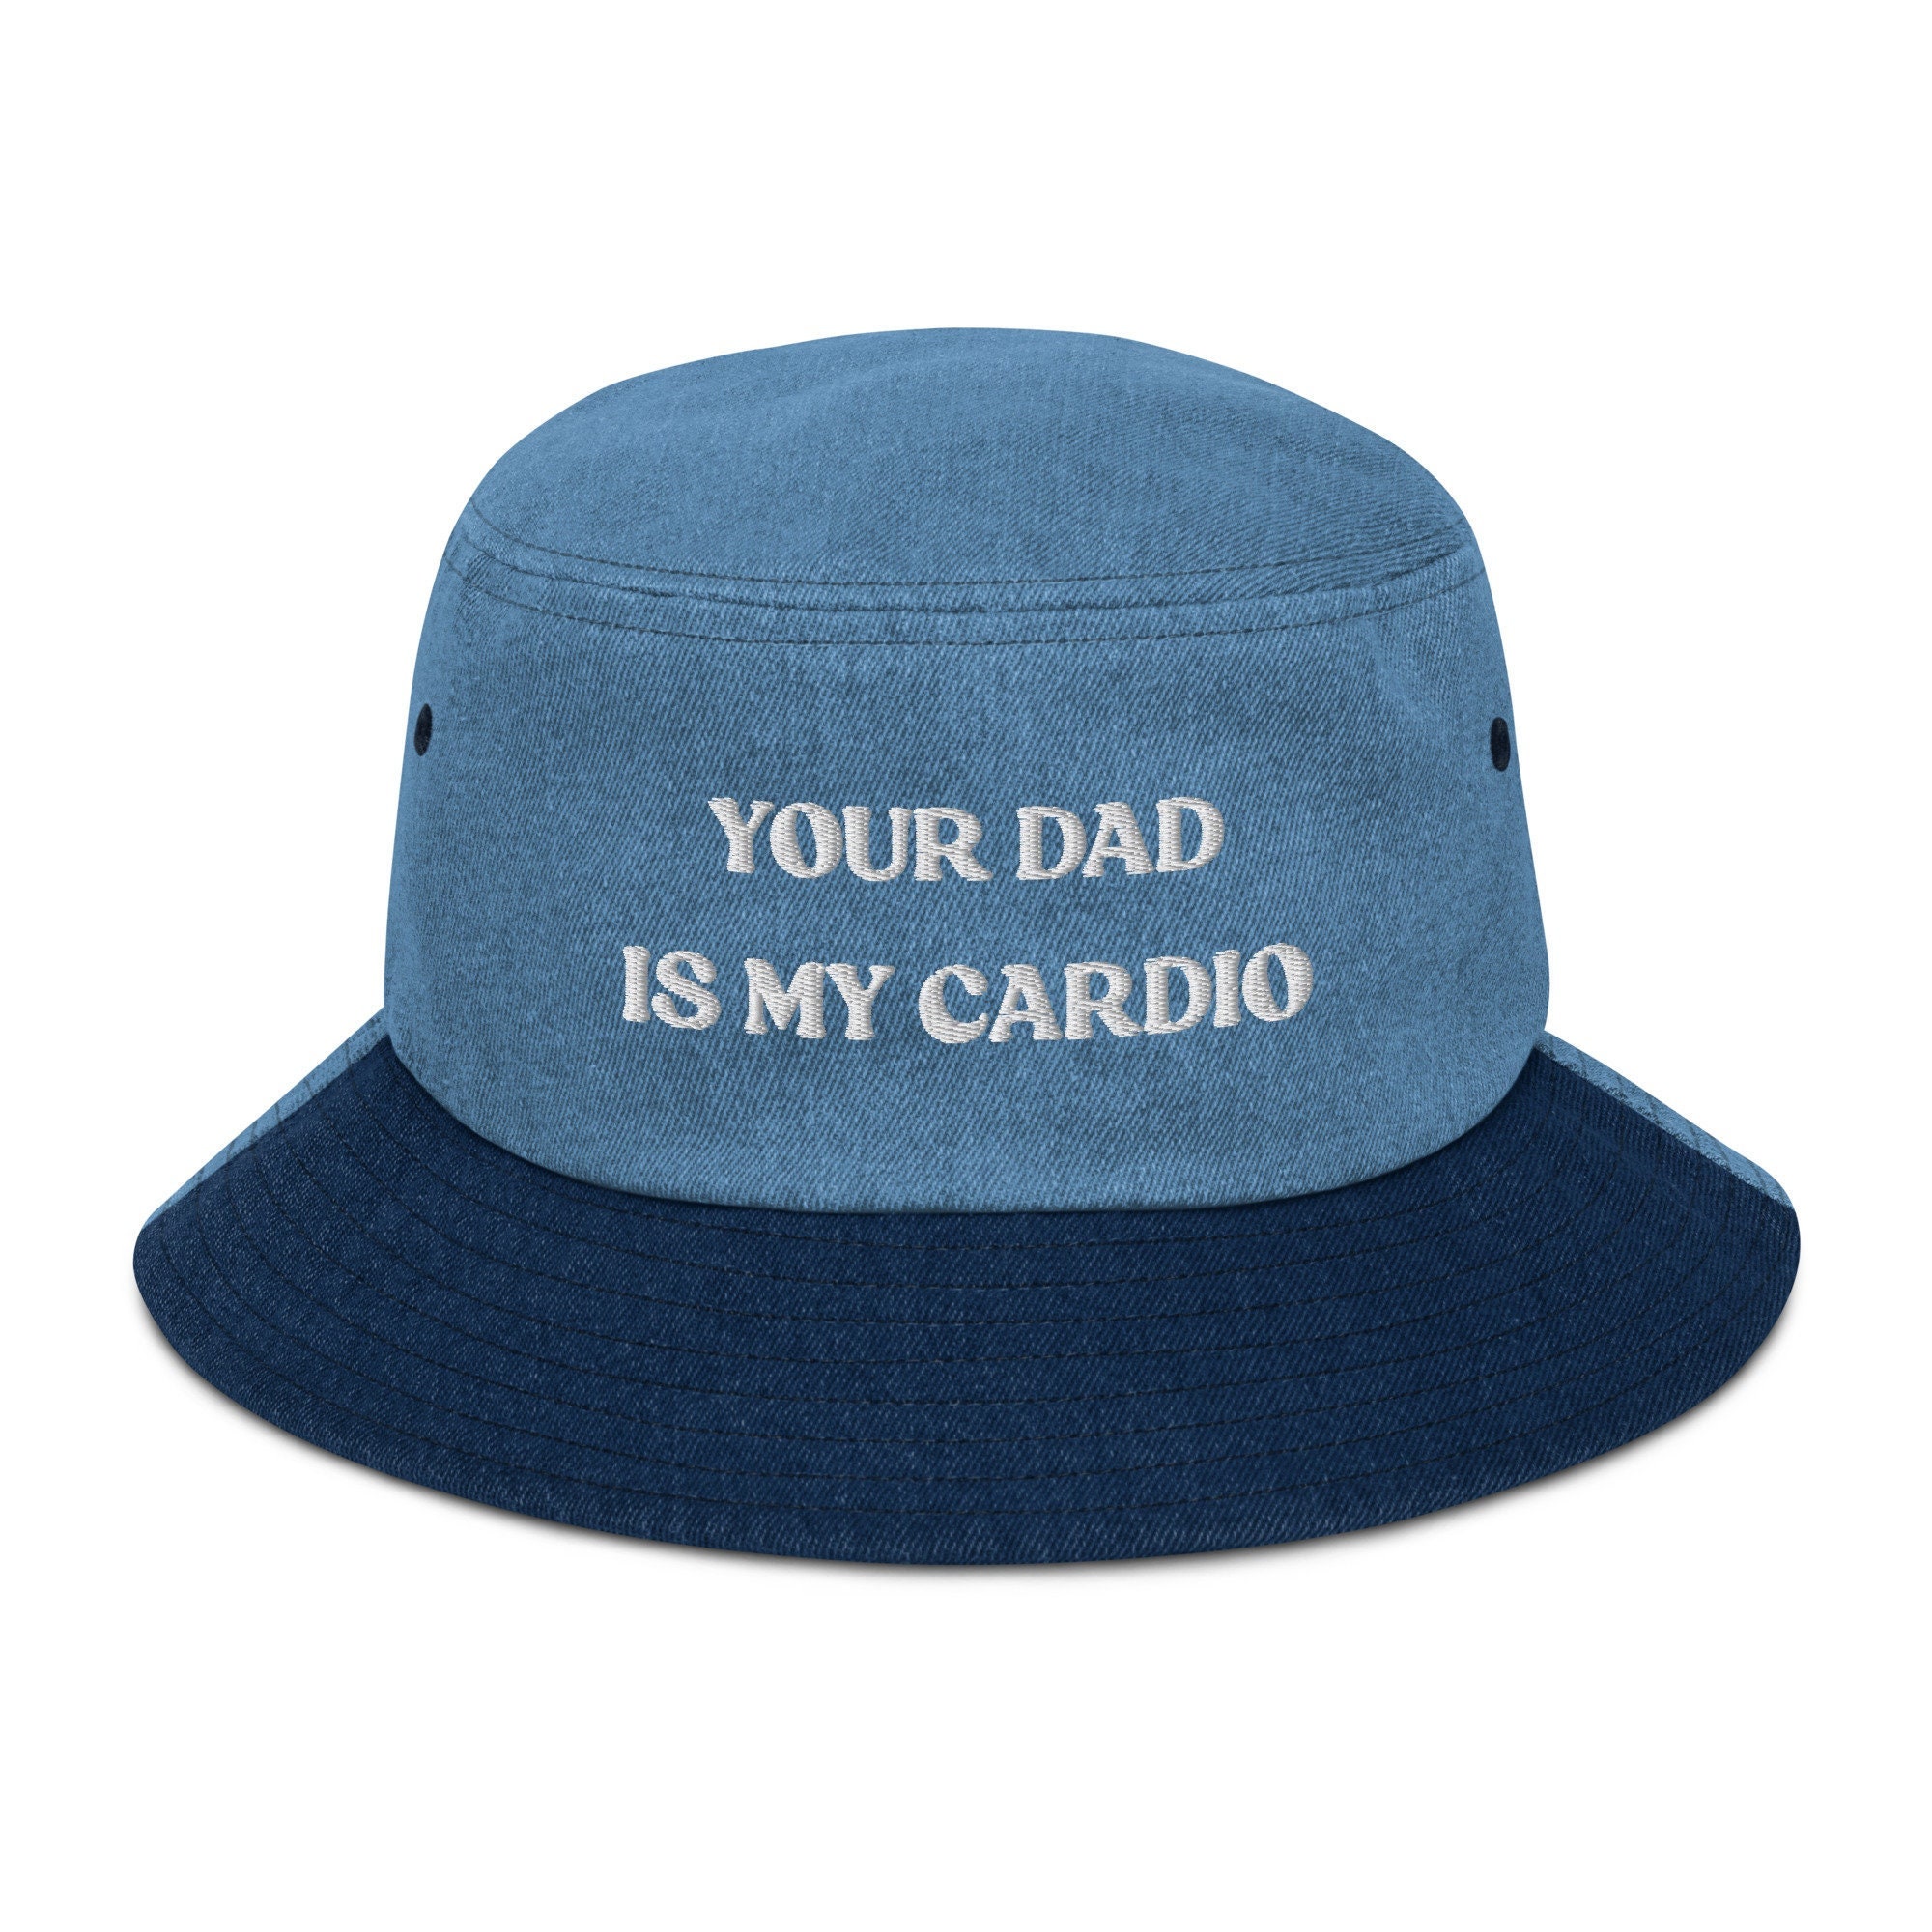 Your Dad is My Cardio Hat, Funny Gift, Funny Hat, Meme Funny Gift, Adult  Humor, Sarcasm, Joke Gag, Gag Gift, Embroidered Denim Bucket Hat -   Norway